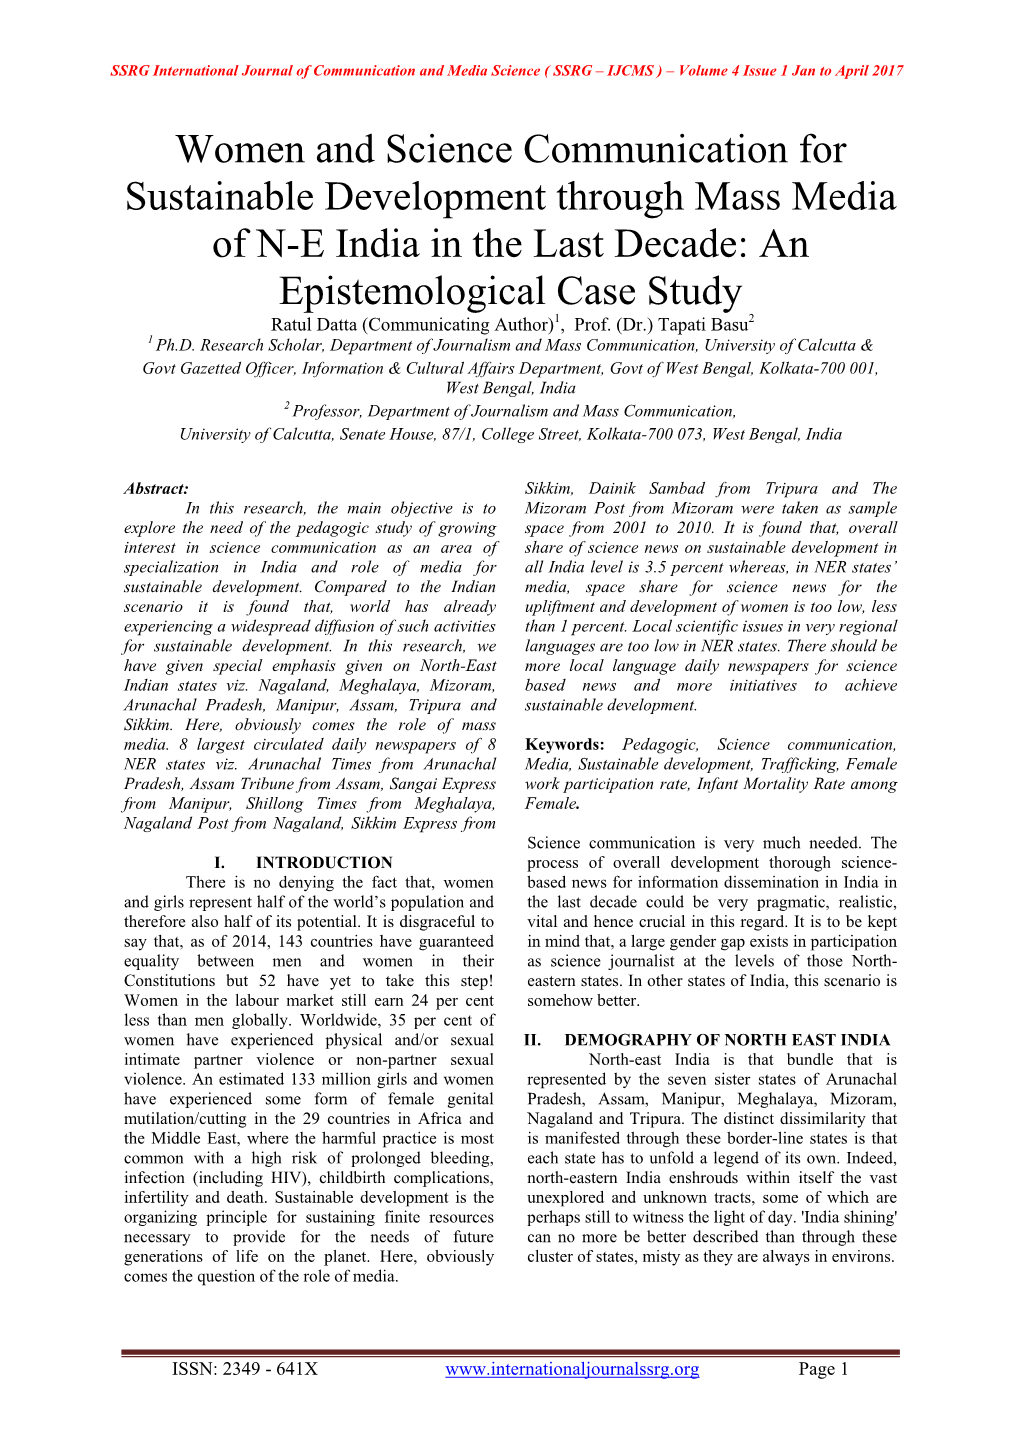 Women and Science Communication for Sustainable Development Through Mass Media of NE India in the Last Decade